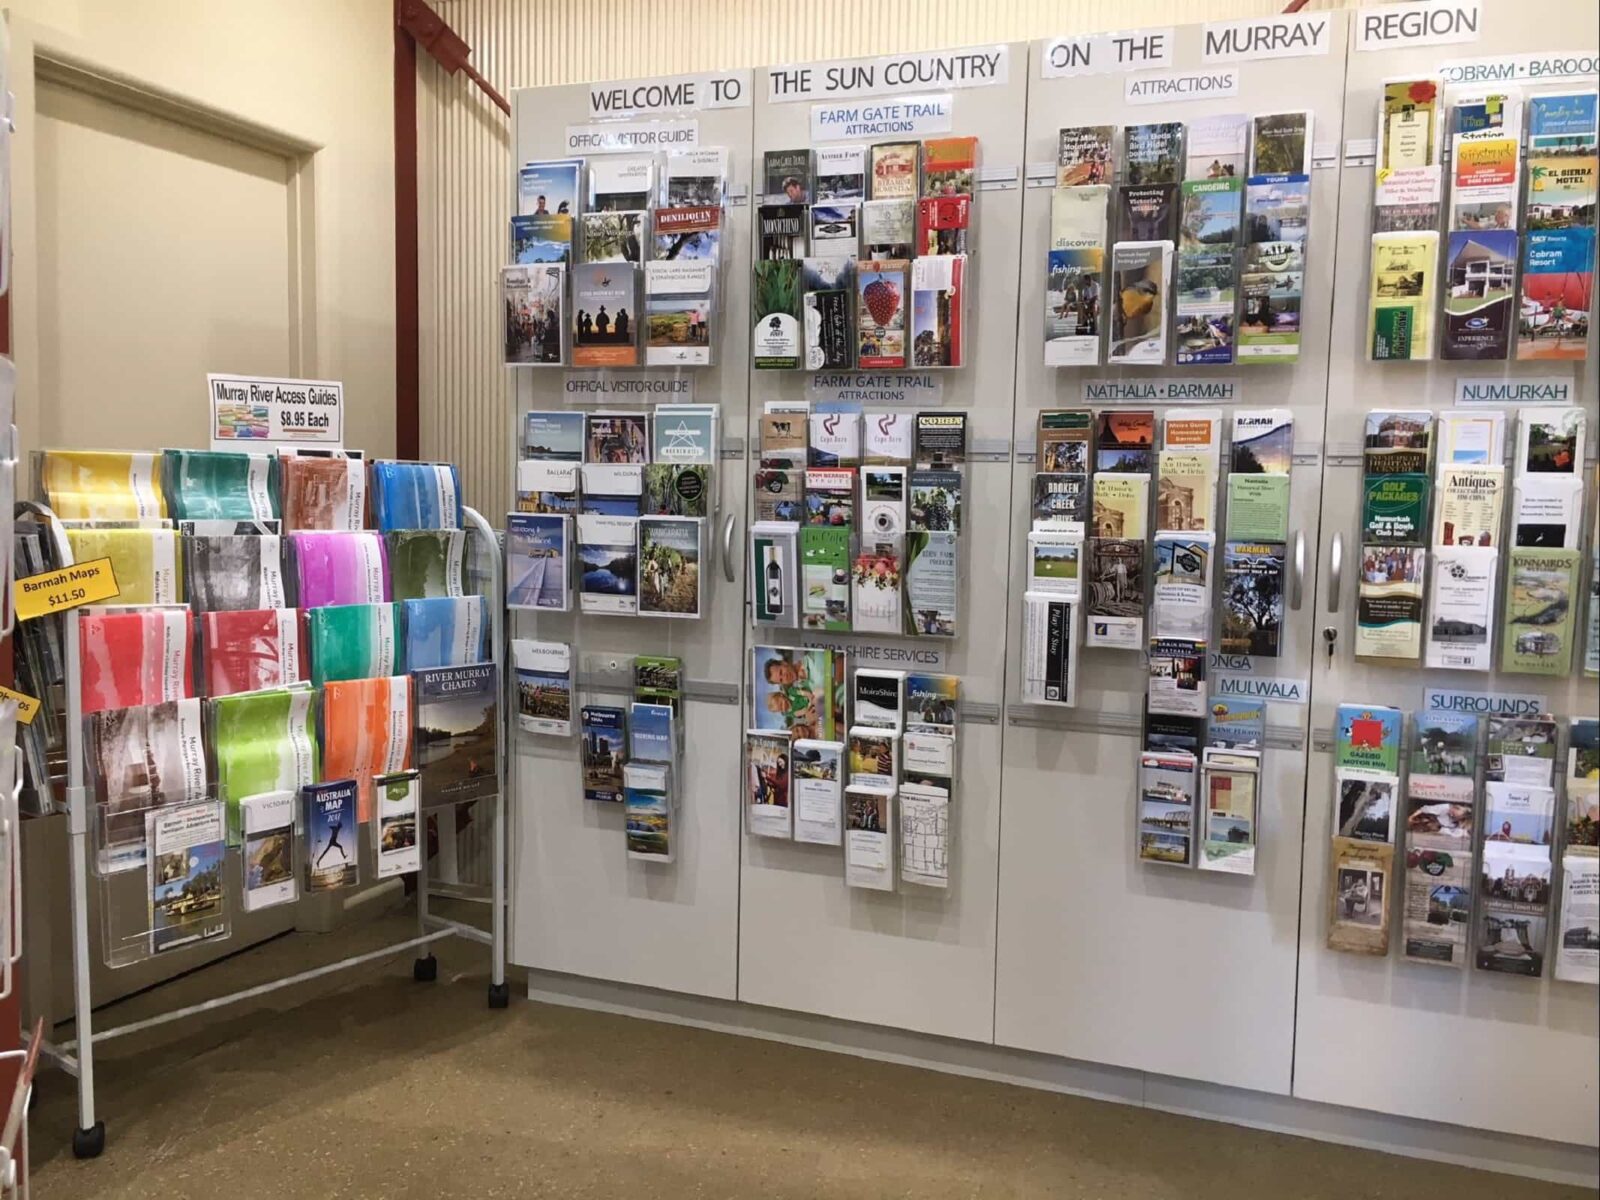 Maps, Brochures, Official Visitor Guides and more